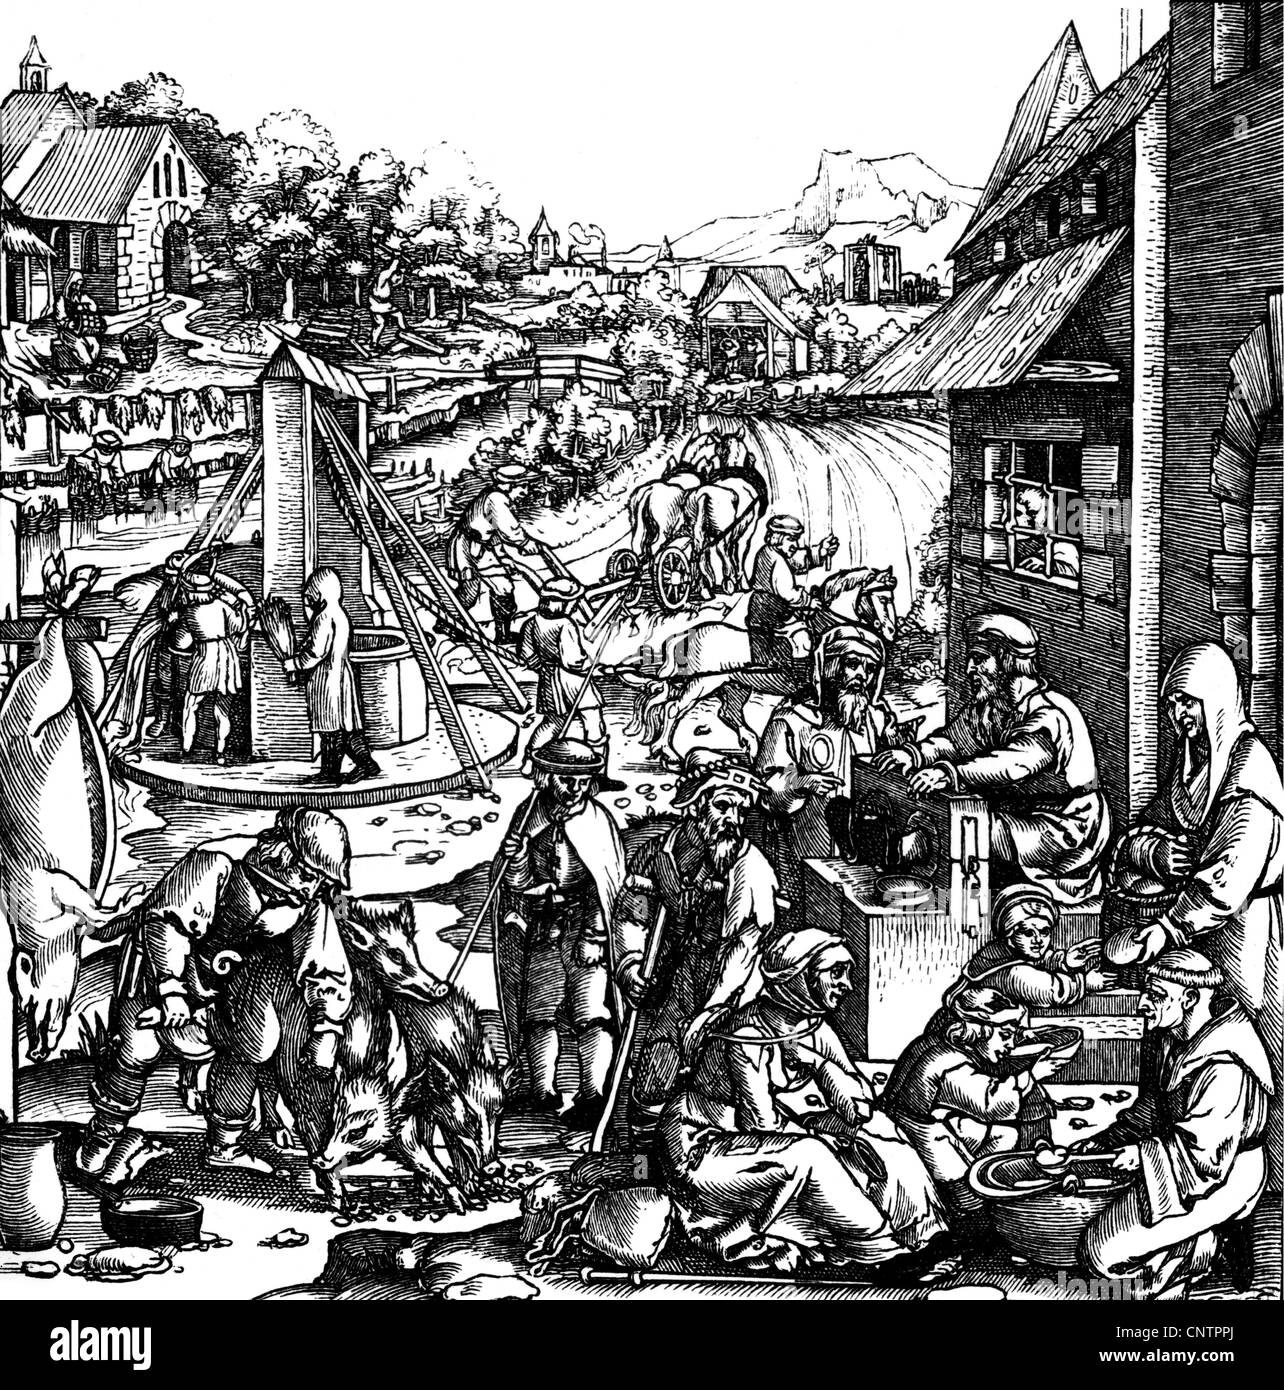 Middle Ages, society, life in a village, woodcut by Hans Sebald Beham (1500 - 1550), women, monk, monks, peasants, peasant, butchers, butcher, butchering, trade, well, wells, 16th century, Renaissance, people, pig, swine, pigs, swines, animal, animals, pillory, pillories, punishment, punishments, poor man, poor woman, the poor, poverty, historic, historical, medieval, people, female, Additional-Rights-Clearences-Not Available Stock Photo